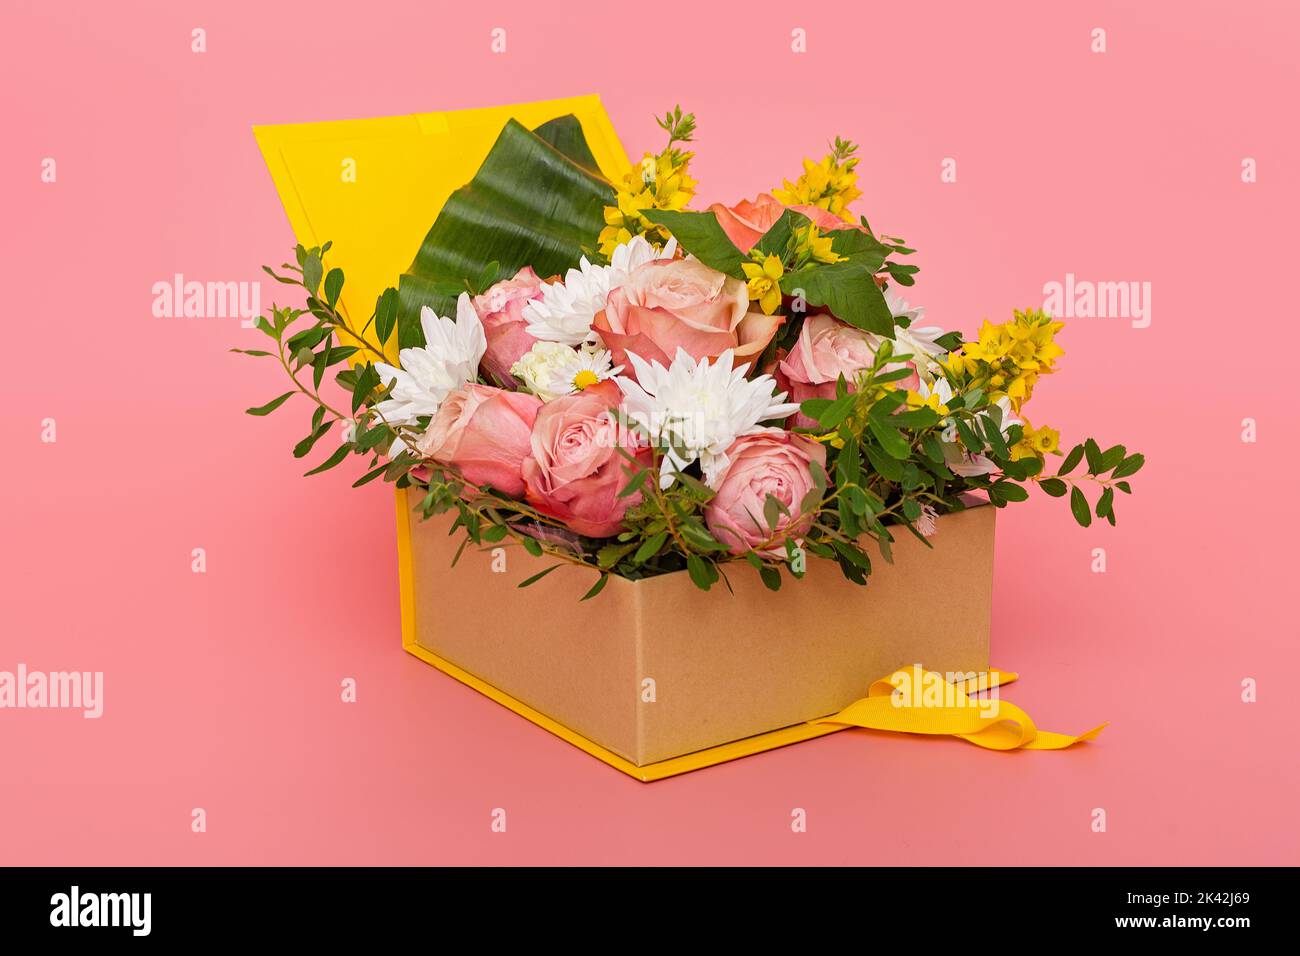 Original flower arrangement in a yellow gift box, on a pink background Stock Photo